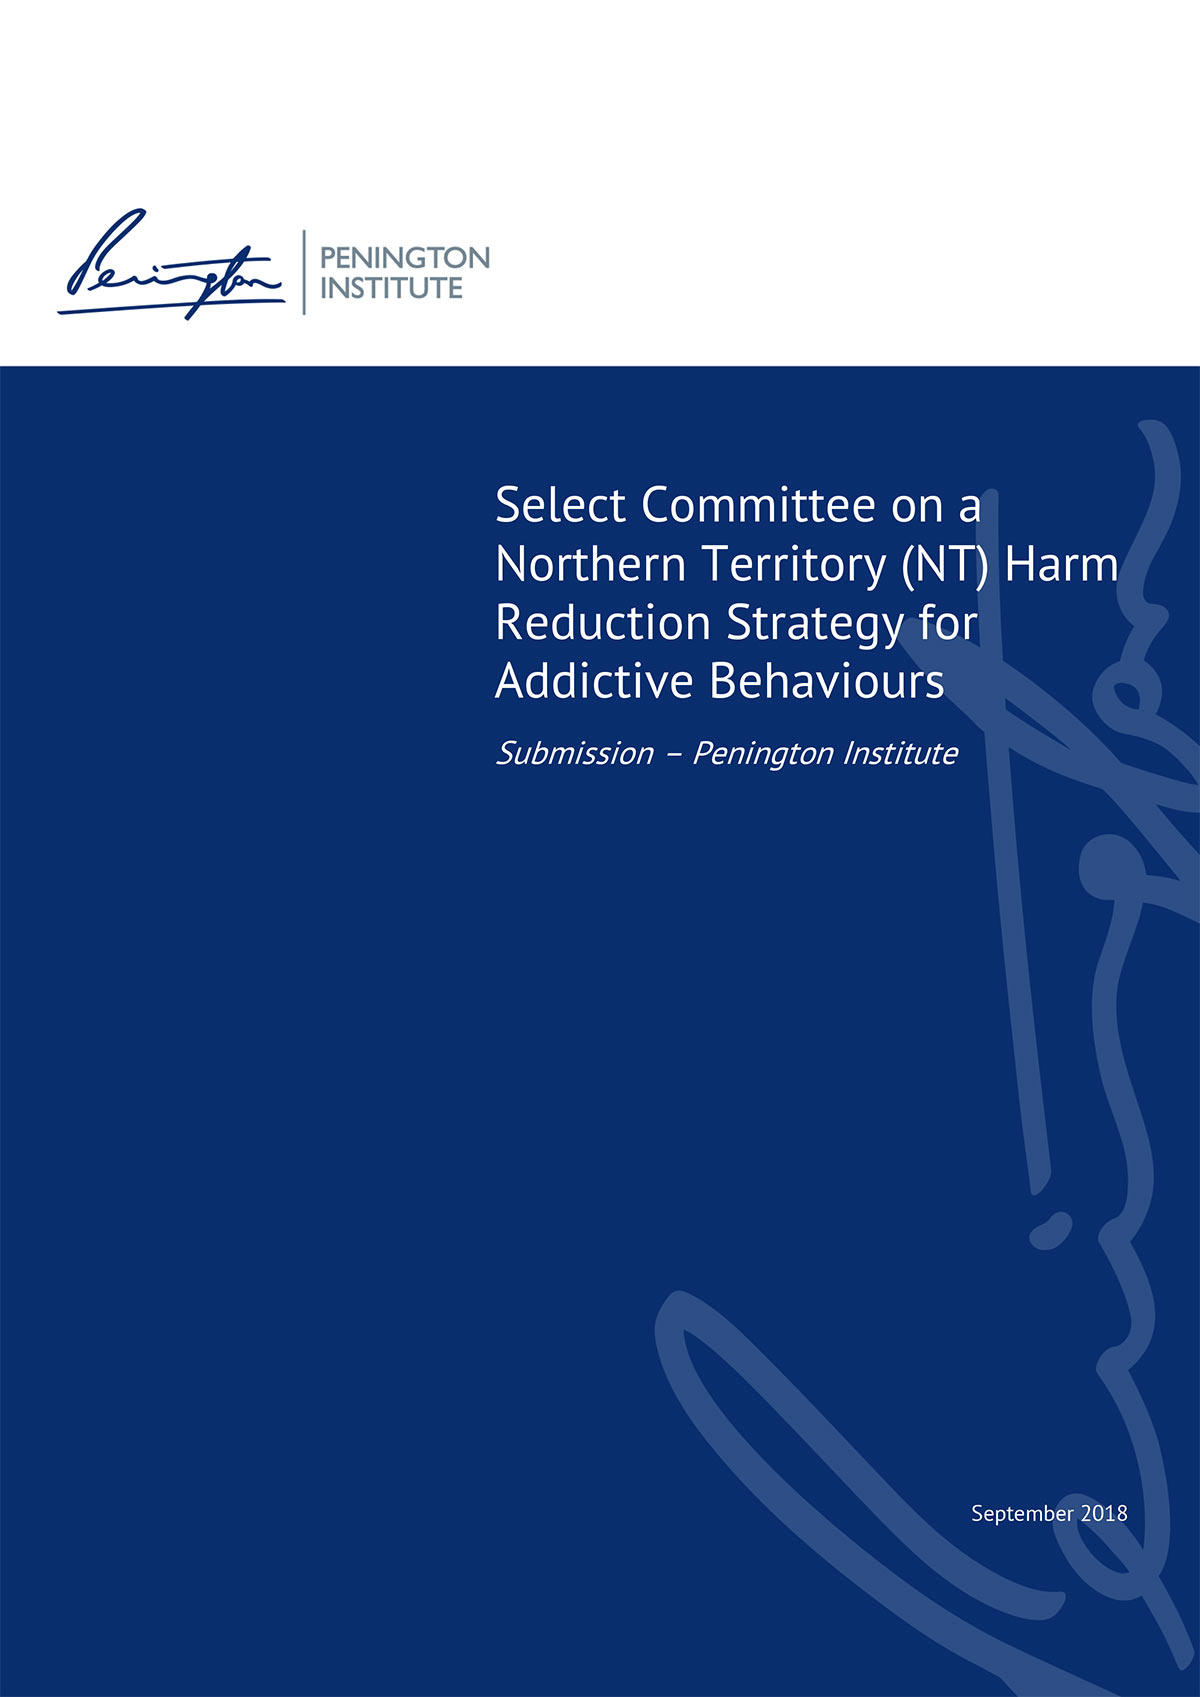 Submission to the Select Committee on a Northern Territory (NT) Harm Reduction Strategy for Addictive Behaviours (2018)